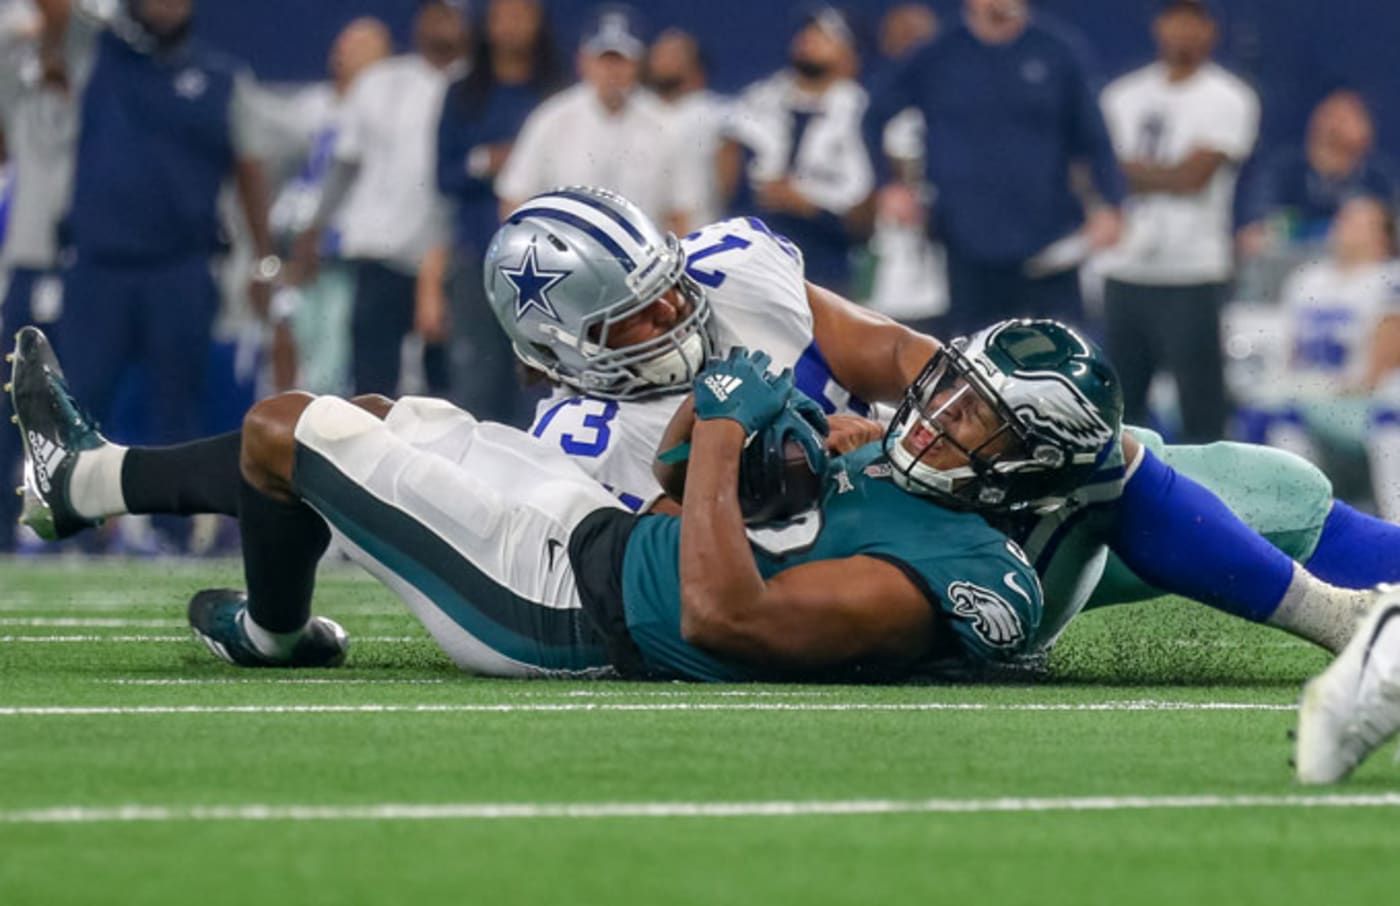 The Eagles and Cowboys play on December 9, 2018